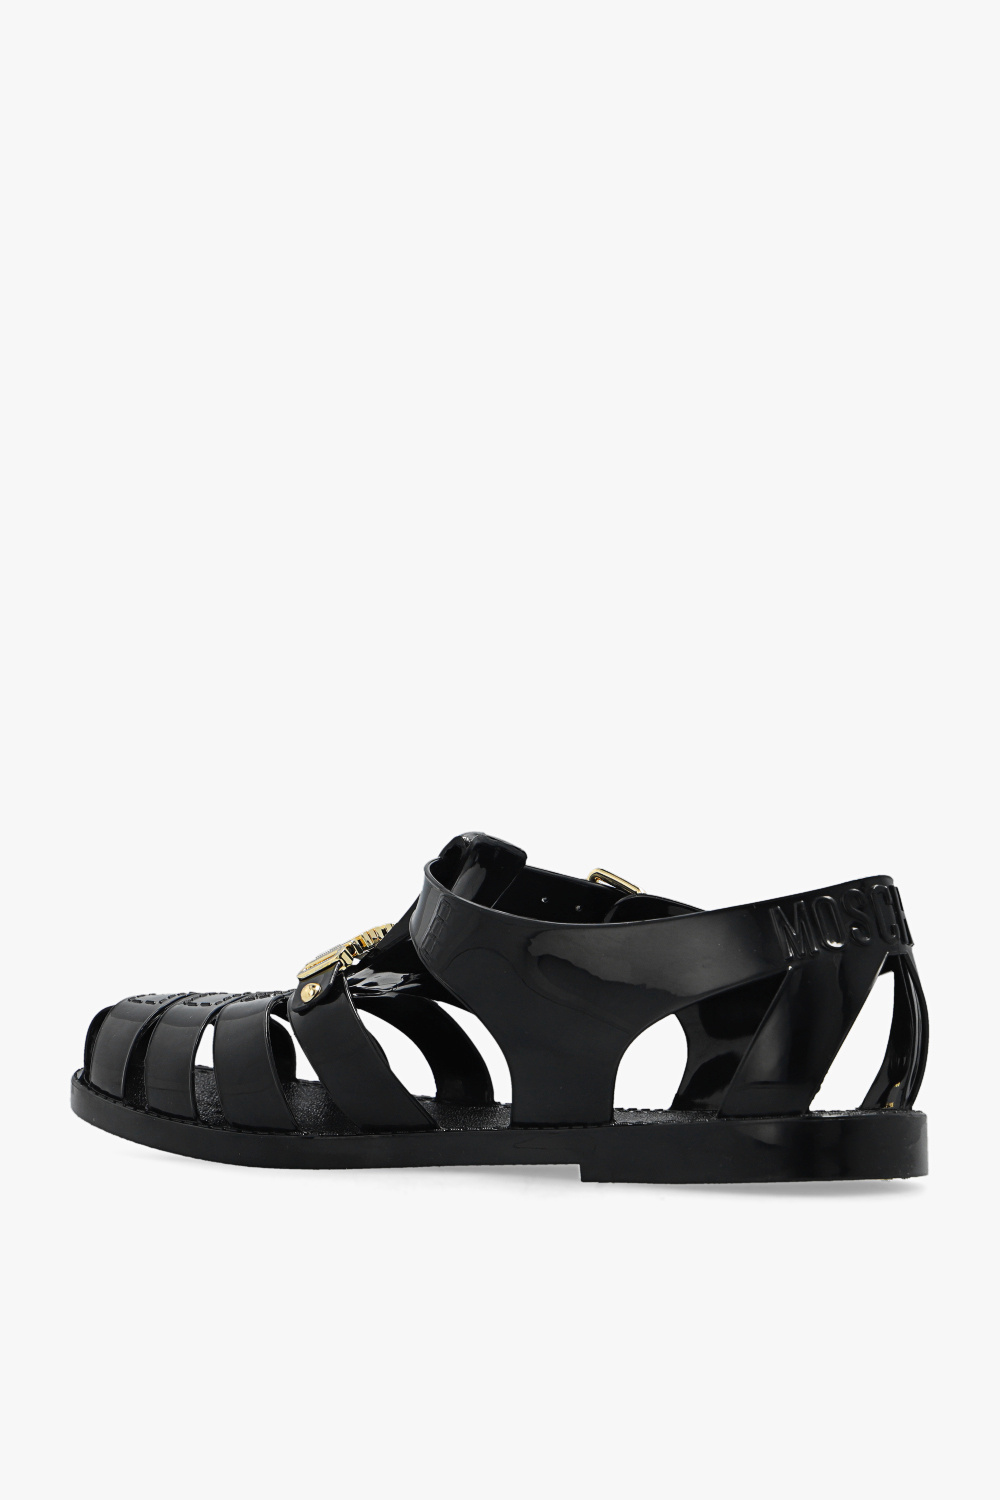 Moschino Rubber sandals with logo